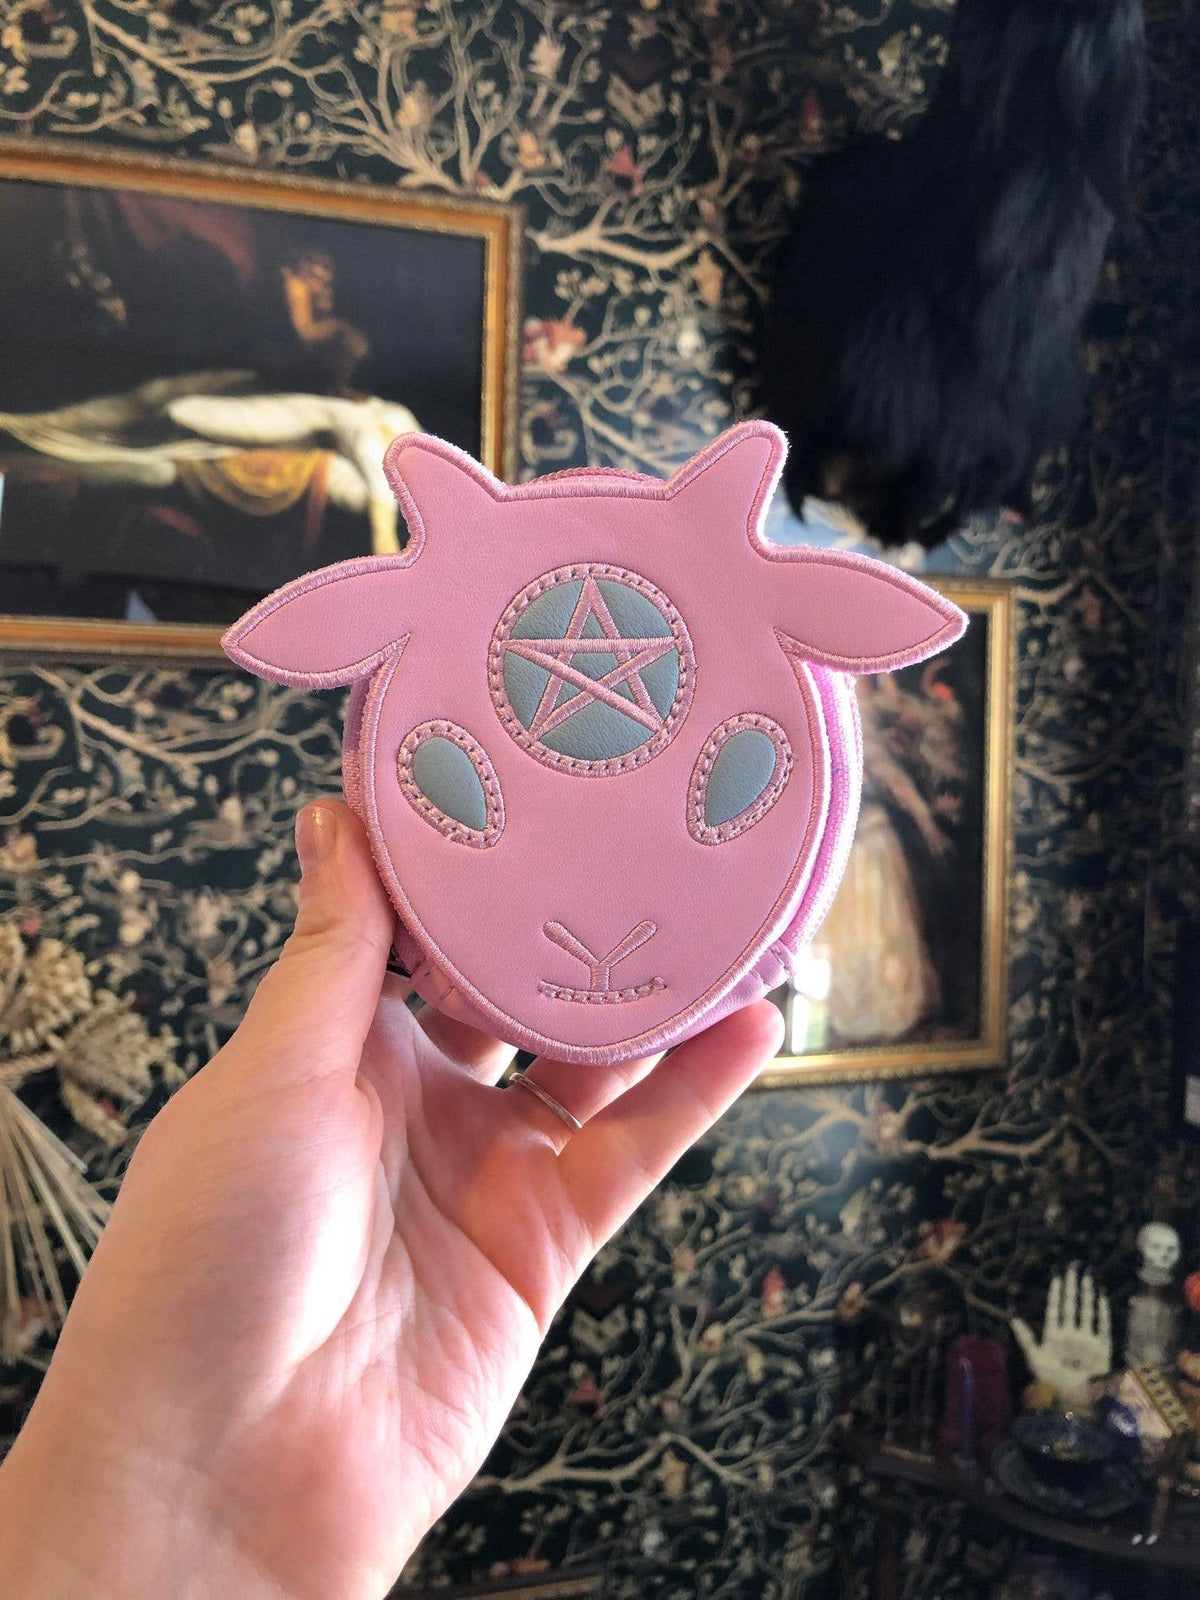 Baby Goat Coin Purse: Cotton Candy Pink